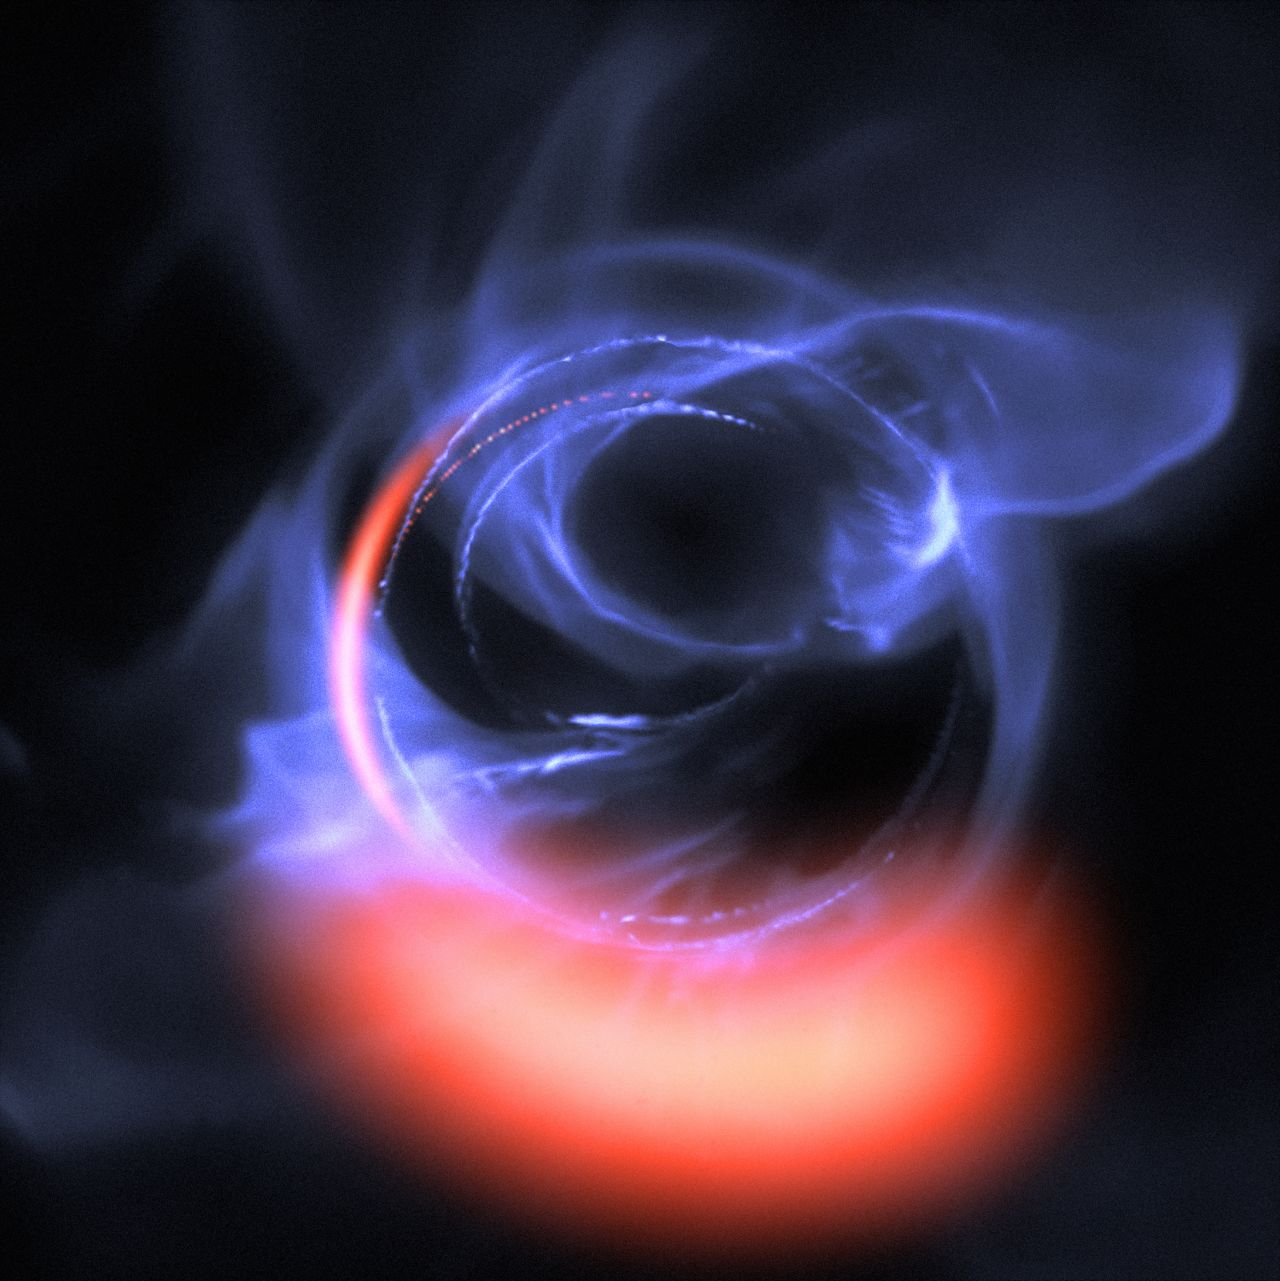 Further evidence of a supermassive black hole at the center of the Milky Way galaxy has been found. This visualization uses data from simulations of orbital motions of gas swirling around about 30% of the speed of light on a circular orbit around the black hole.